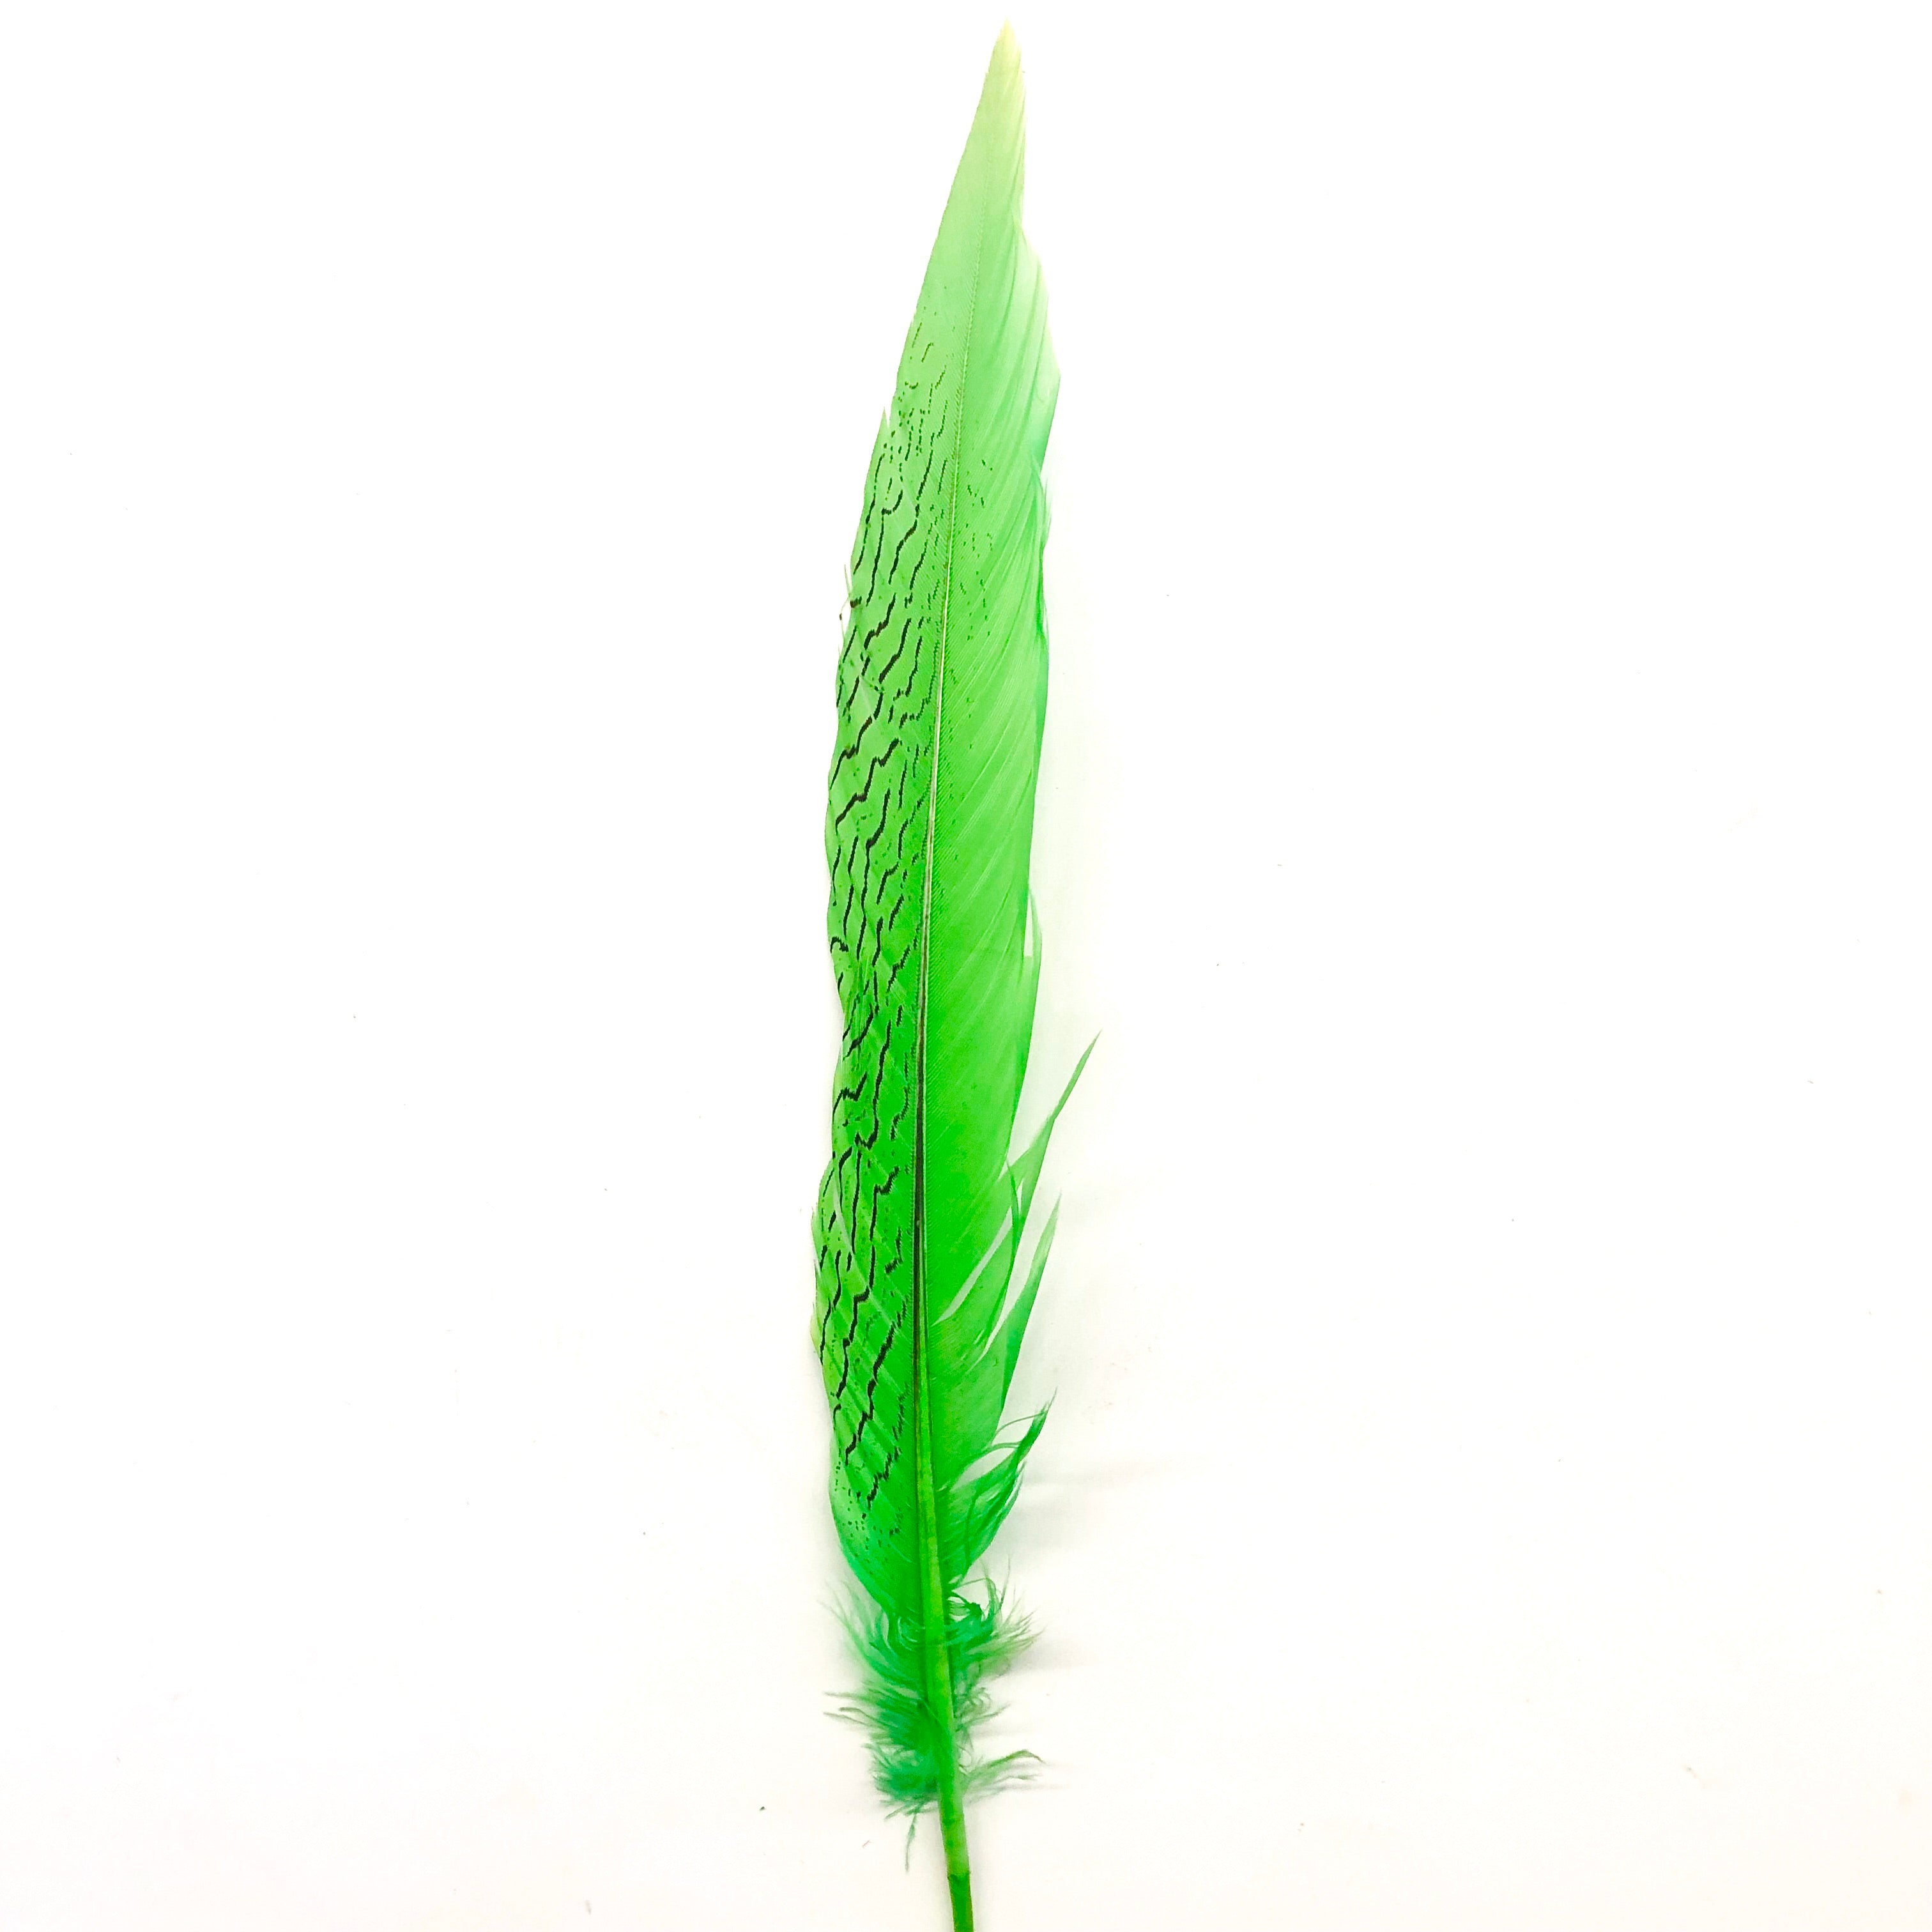 6" to 10" Silver Pheasant Tail Feather - Lime Green